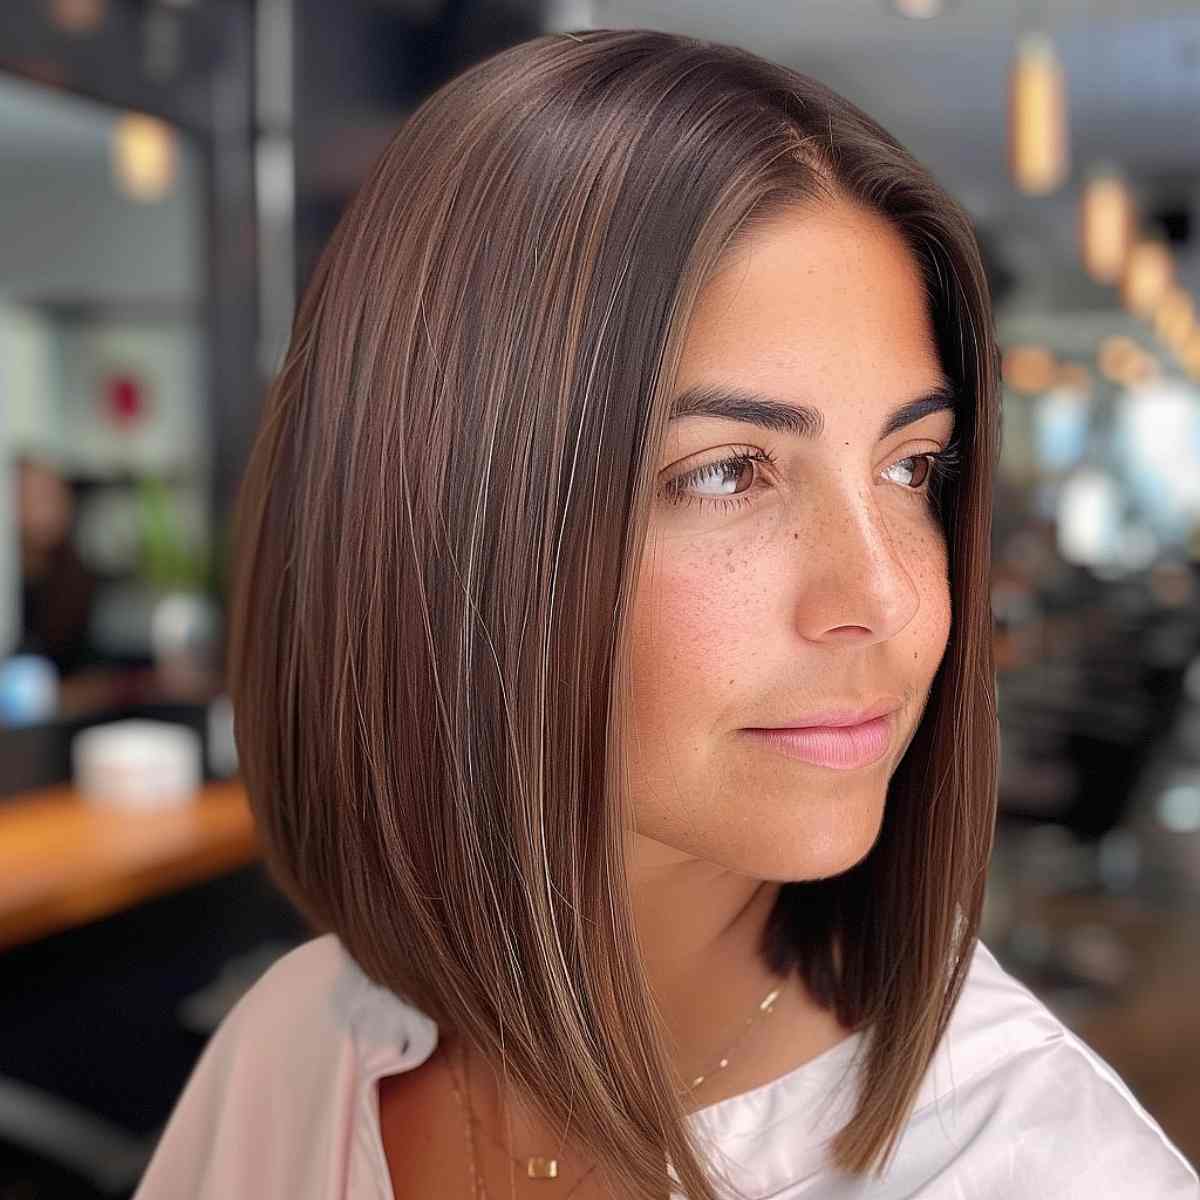 Slimming Angled Long Bob for Round Face Shapes